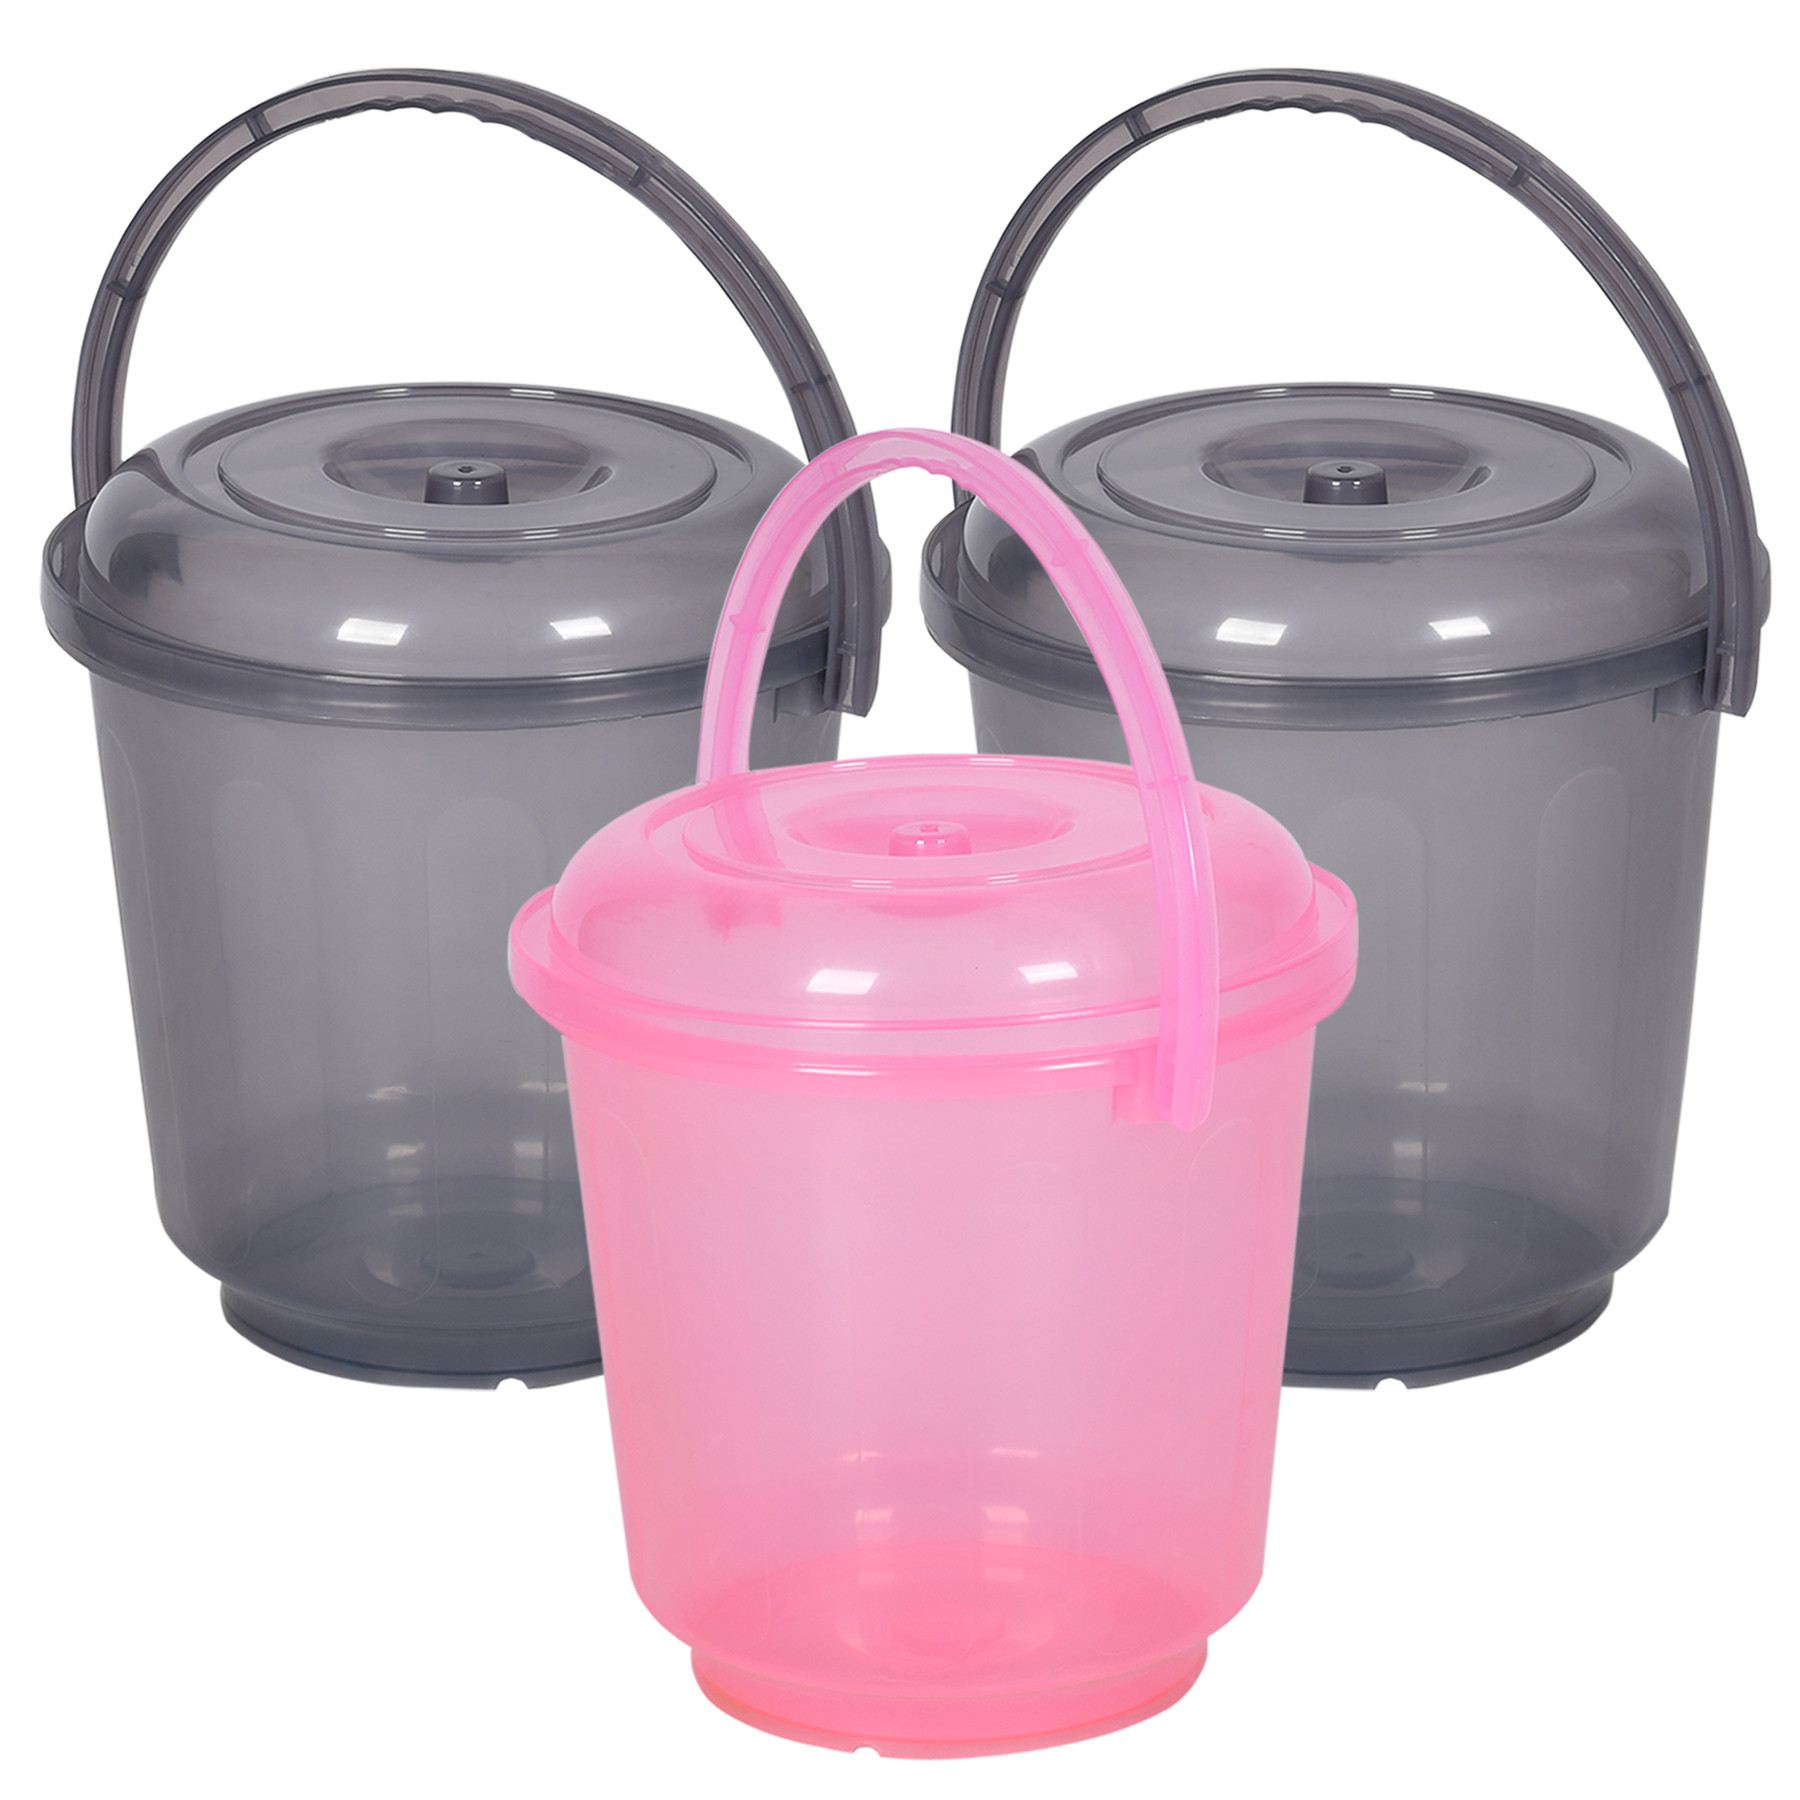 Kuber Industries Bucket | Bathroom Bucket | Utility Bucket for Daily Use | Water Storage Bucket | Bathing Bucket with Handle & Lid | 13 LTR | SUPER-013 | Transparent | Pink & Gray